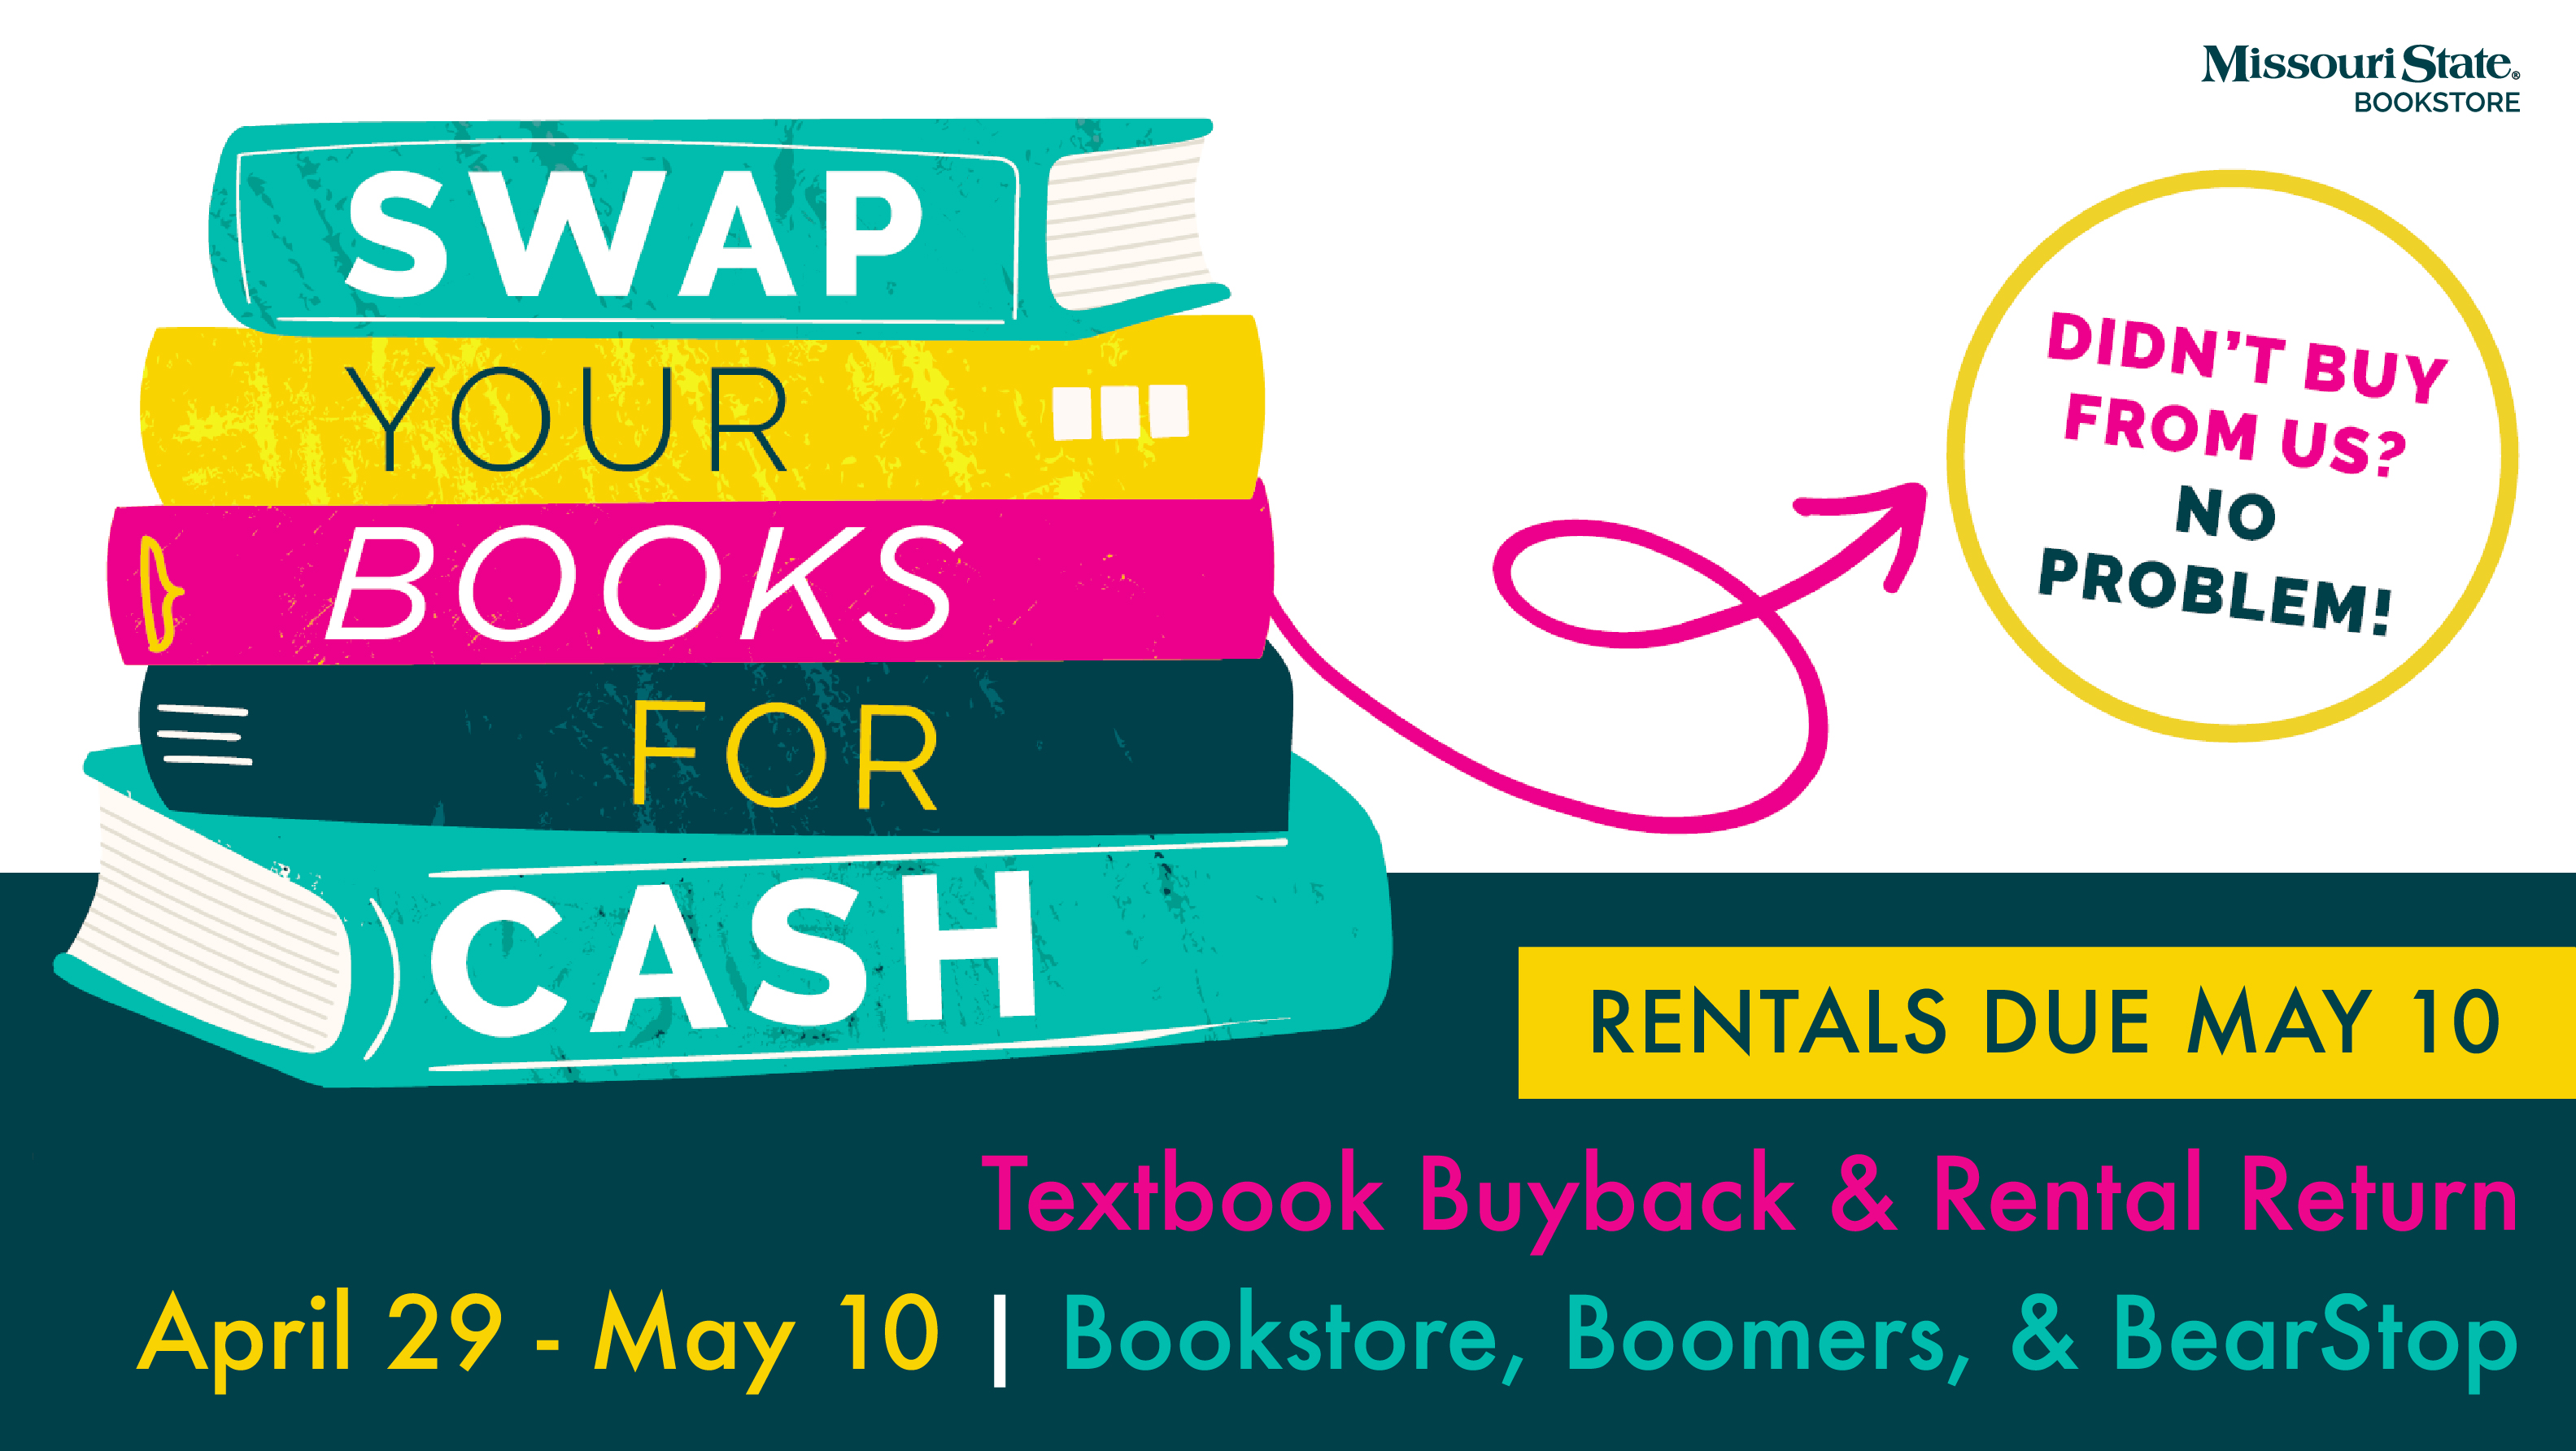 NSwap your books for cash, Didn't buy from us? No problem. Rentals due May 10, Textbook buyback and rental return, April 29- May 10, Bookstore, Boomers, and Bear Stop.